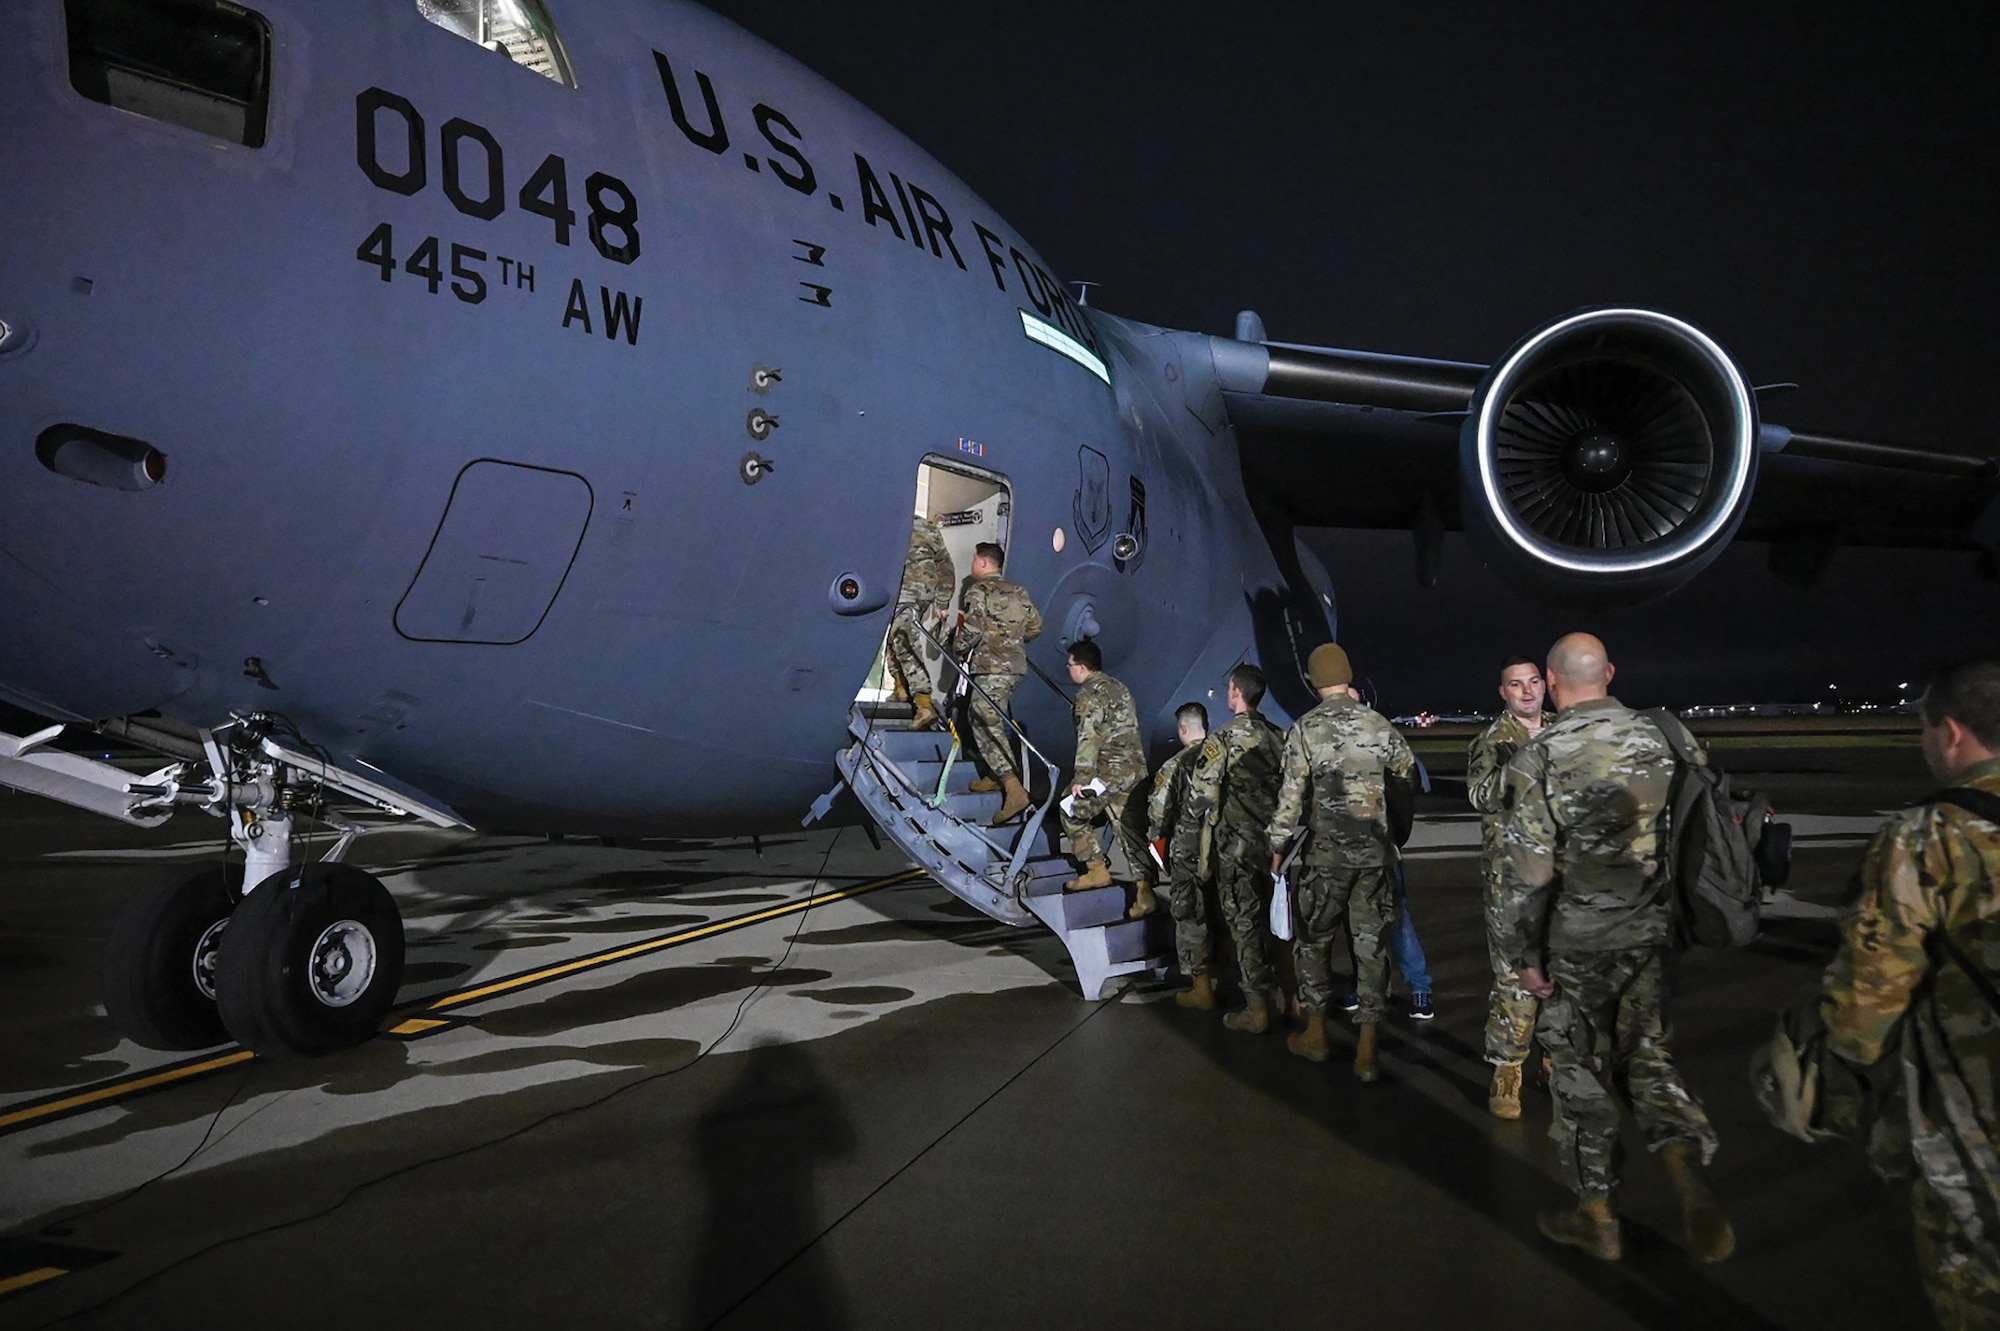 The 445th Airlift Wing, an Air Force Reserve unit assigned to Wright-Patterson Air Force Base, Ohio, prepped and deployed about 140 people, Oct. 27-29, 2023. In addition to personnel, four C-17 Globemaster III aircraft and cargo were used to support these efforts – the wing’s first C-17 force element mobilization. (U.S. Air Force photo/Master Sgt. Patrick O’Reilly)